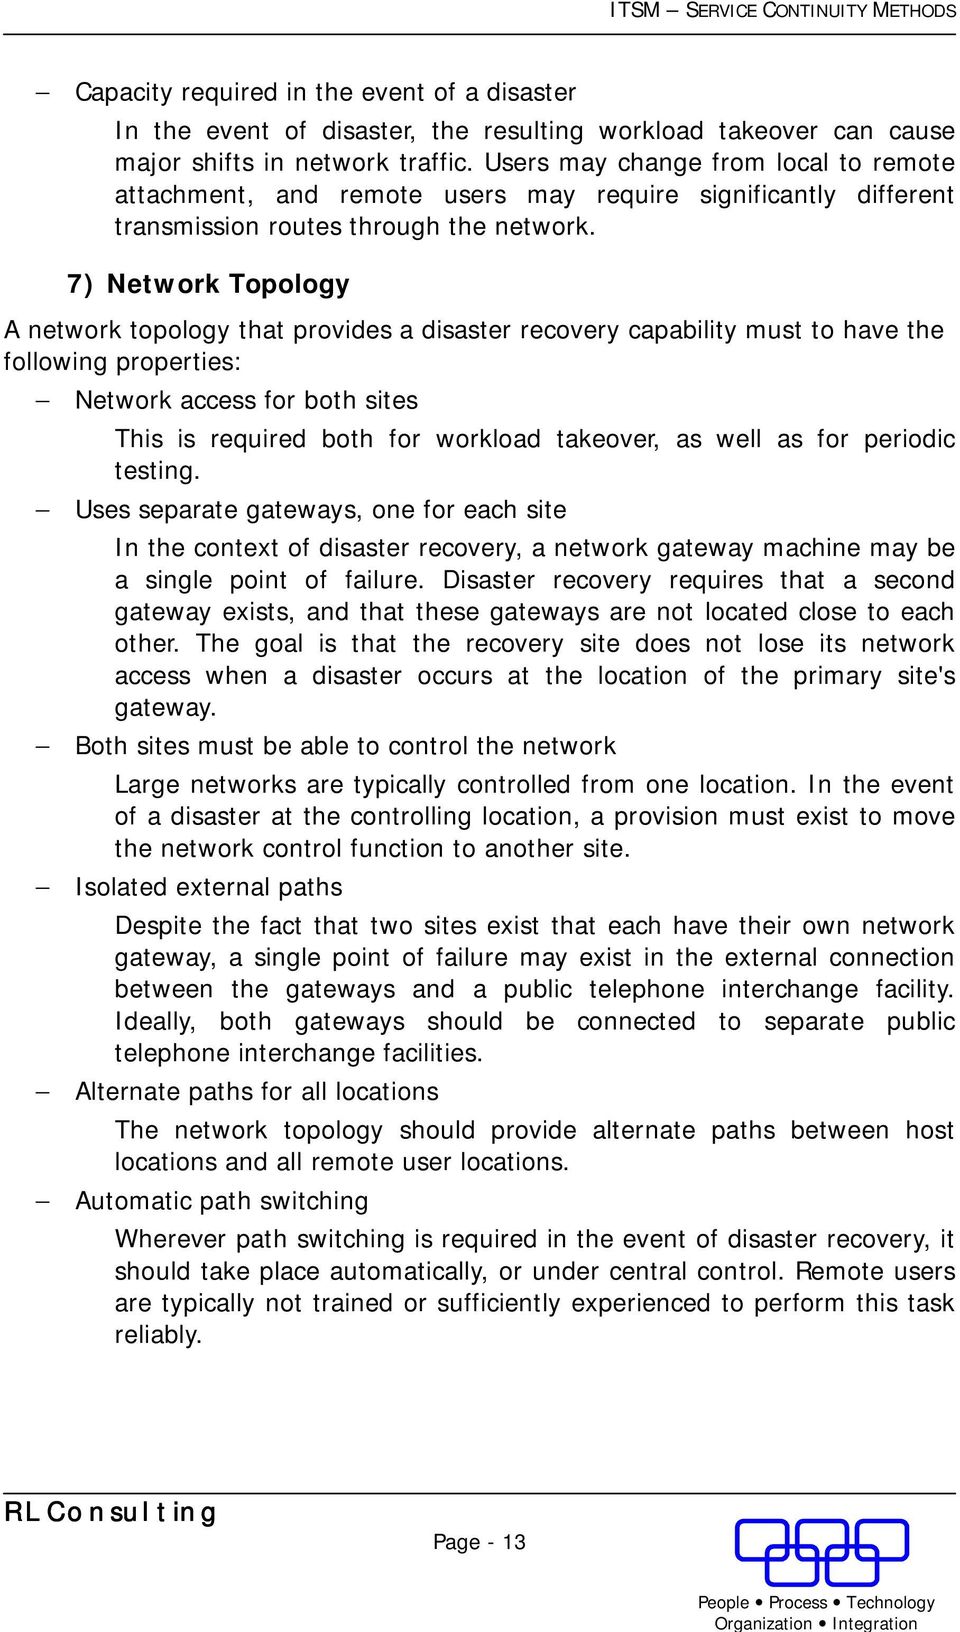 7) Network Topology A network topology that provides a disaster recovery capability must to have the following properties: Network access for both sites This is required both for workload takeover,